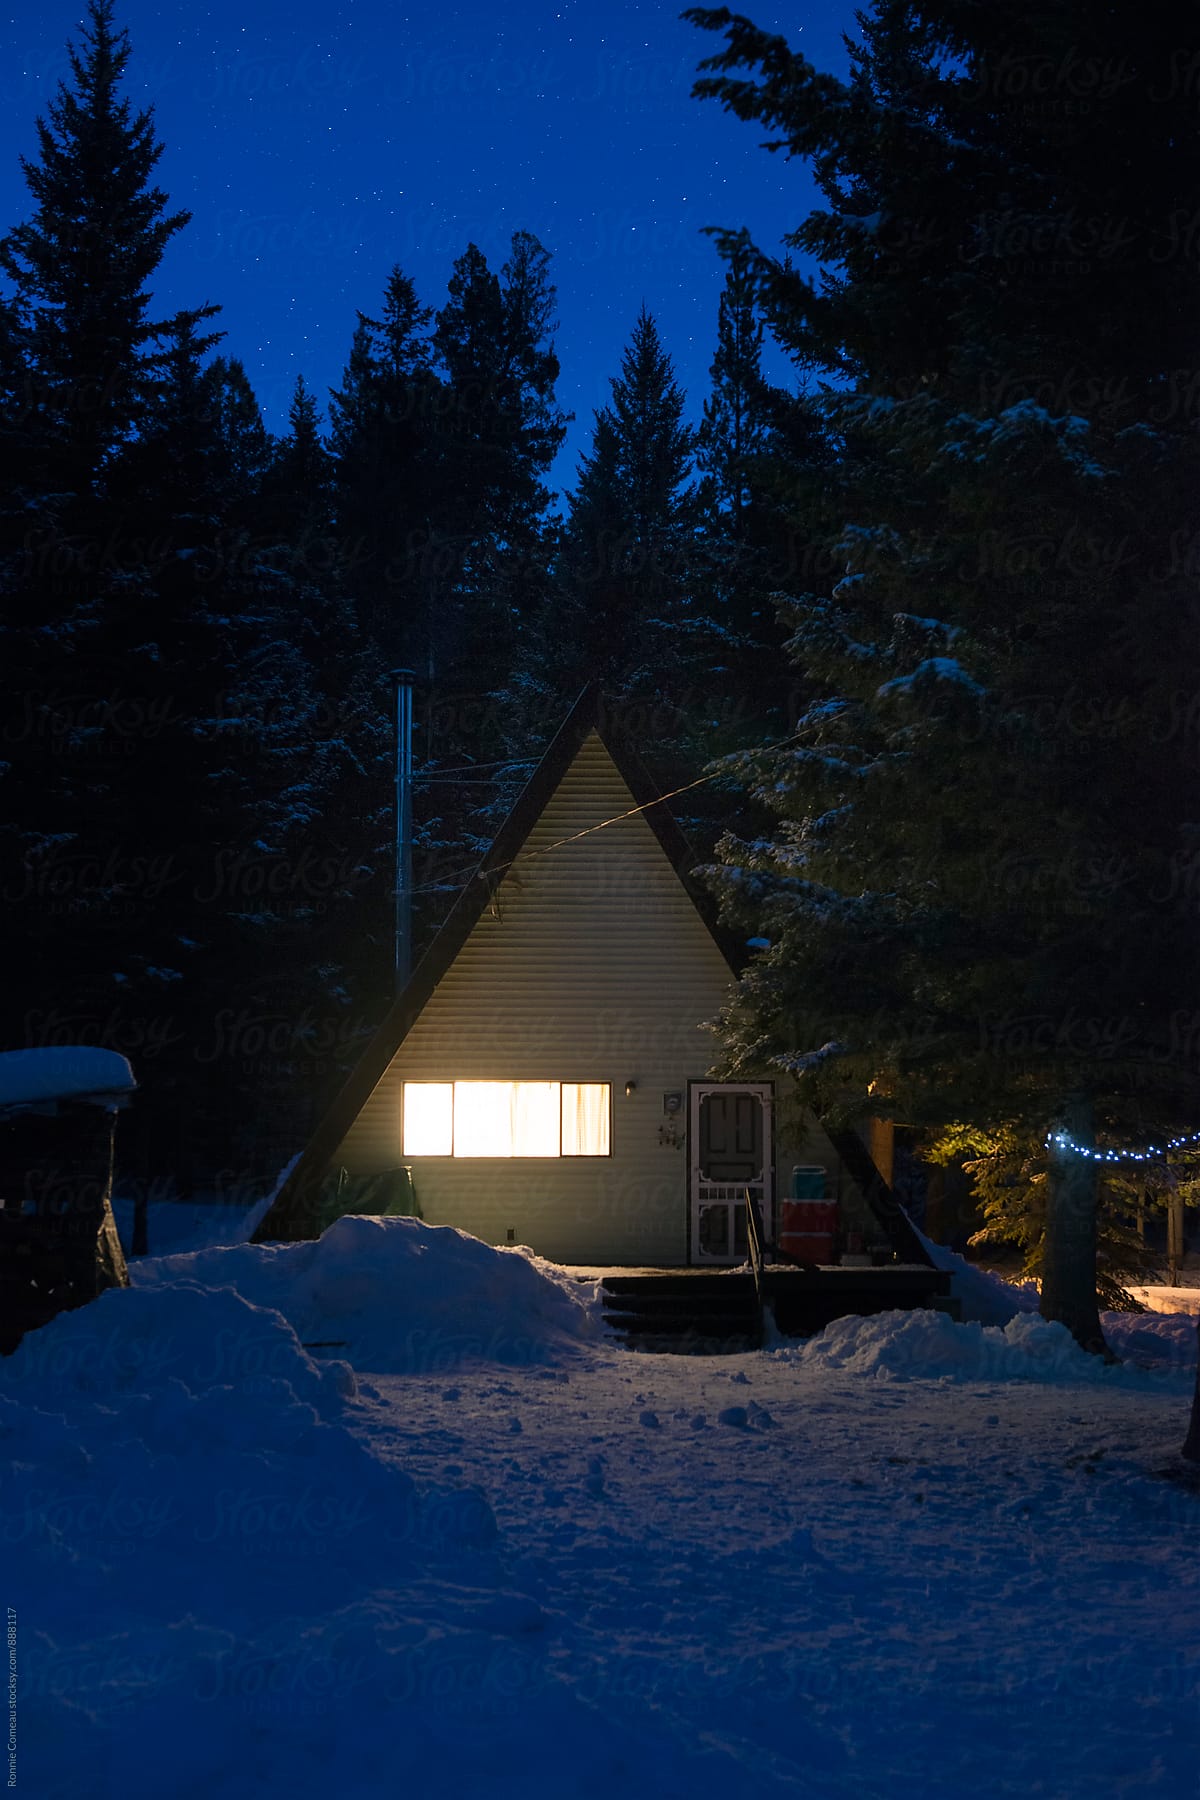 A-Frame Cabin In The Woods In Winter And At Night